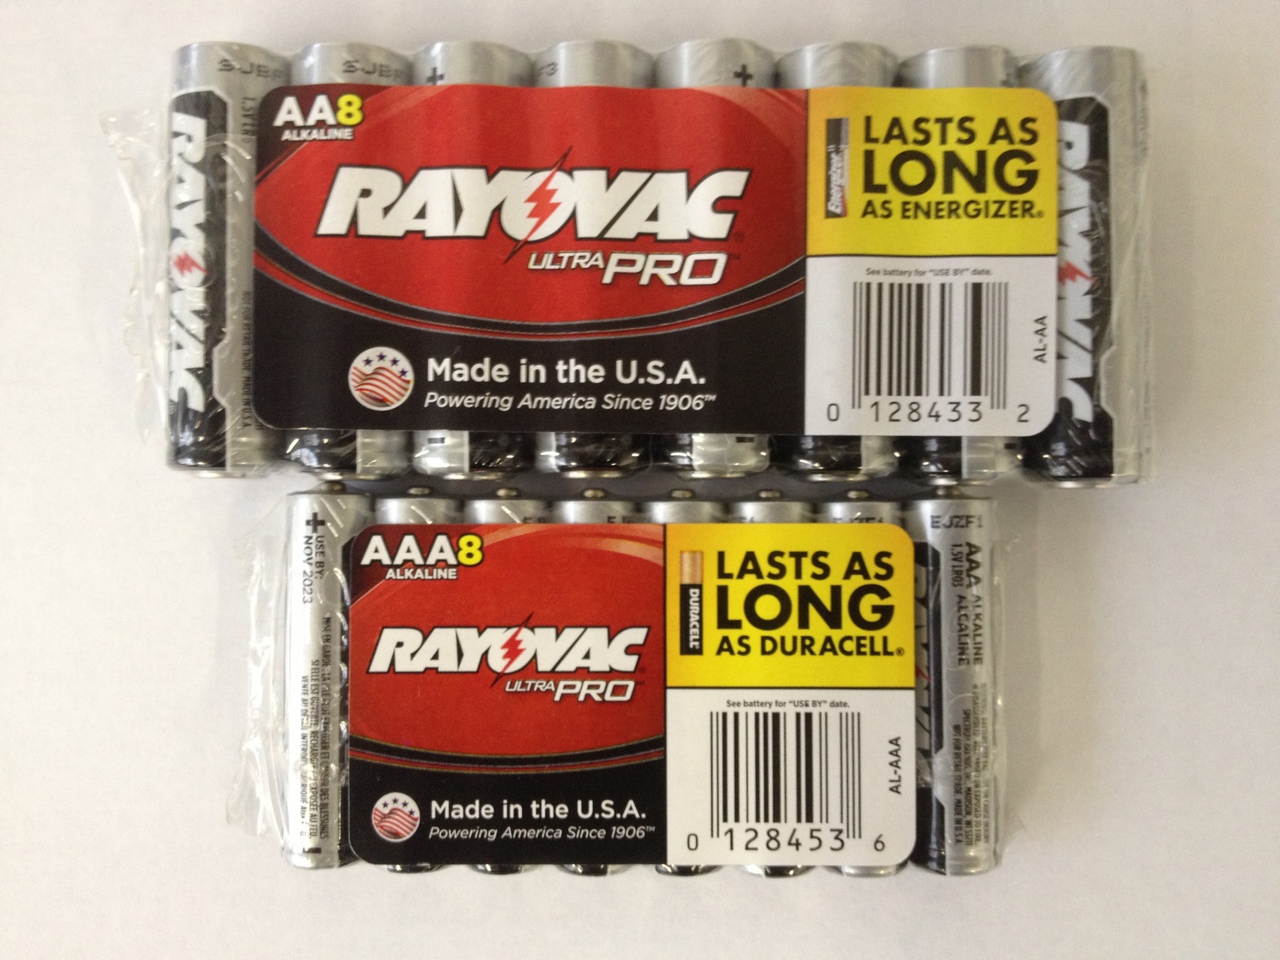 16 Piece Combo Pack - Rayovac UltraPRO Alkaline 8 AAA Batteries And 8 AA Batteries + FREE SHIPPING!